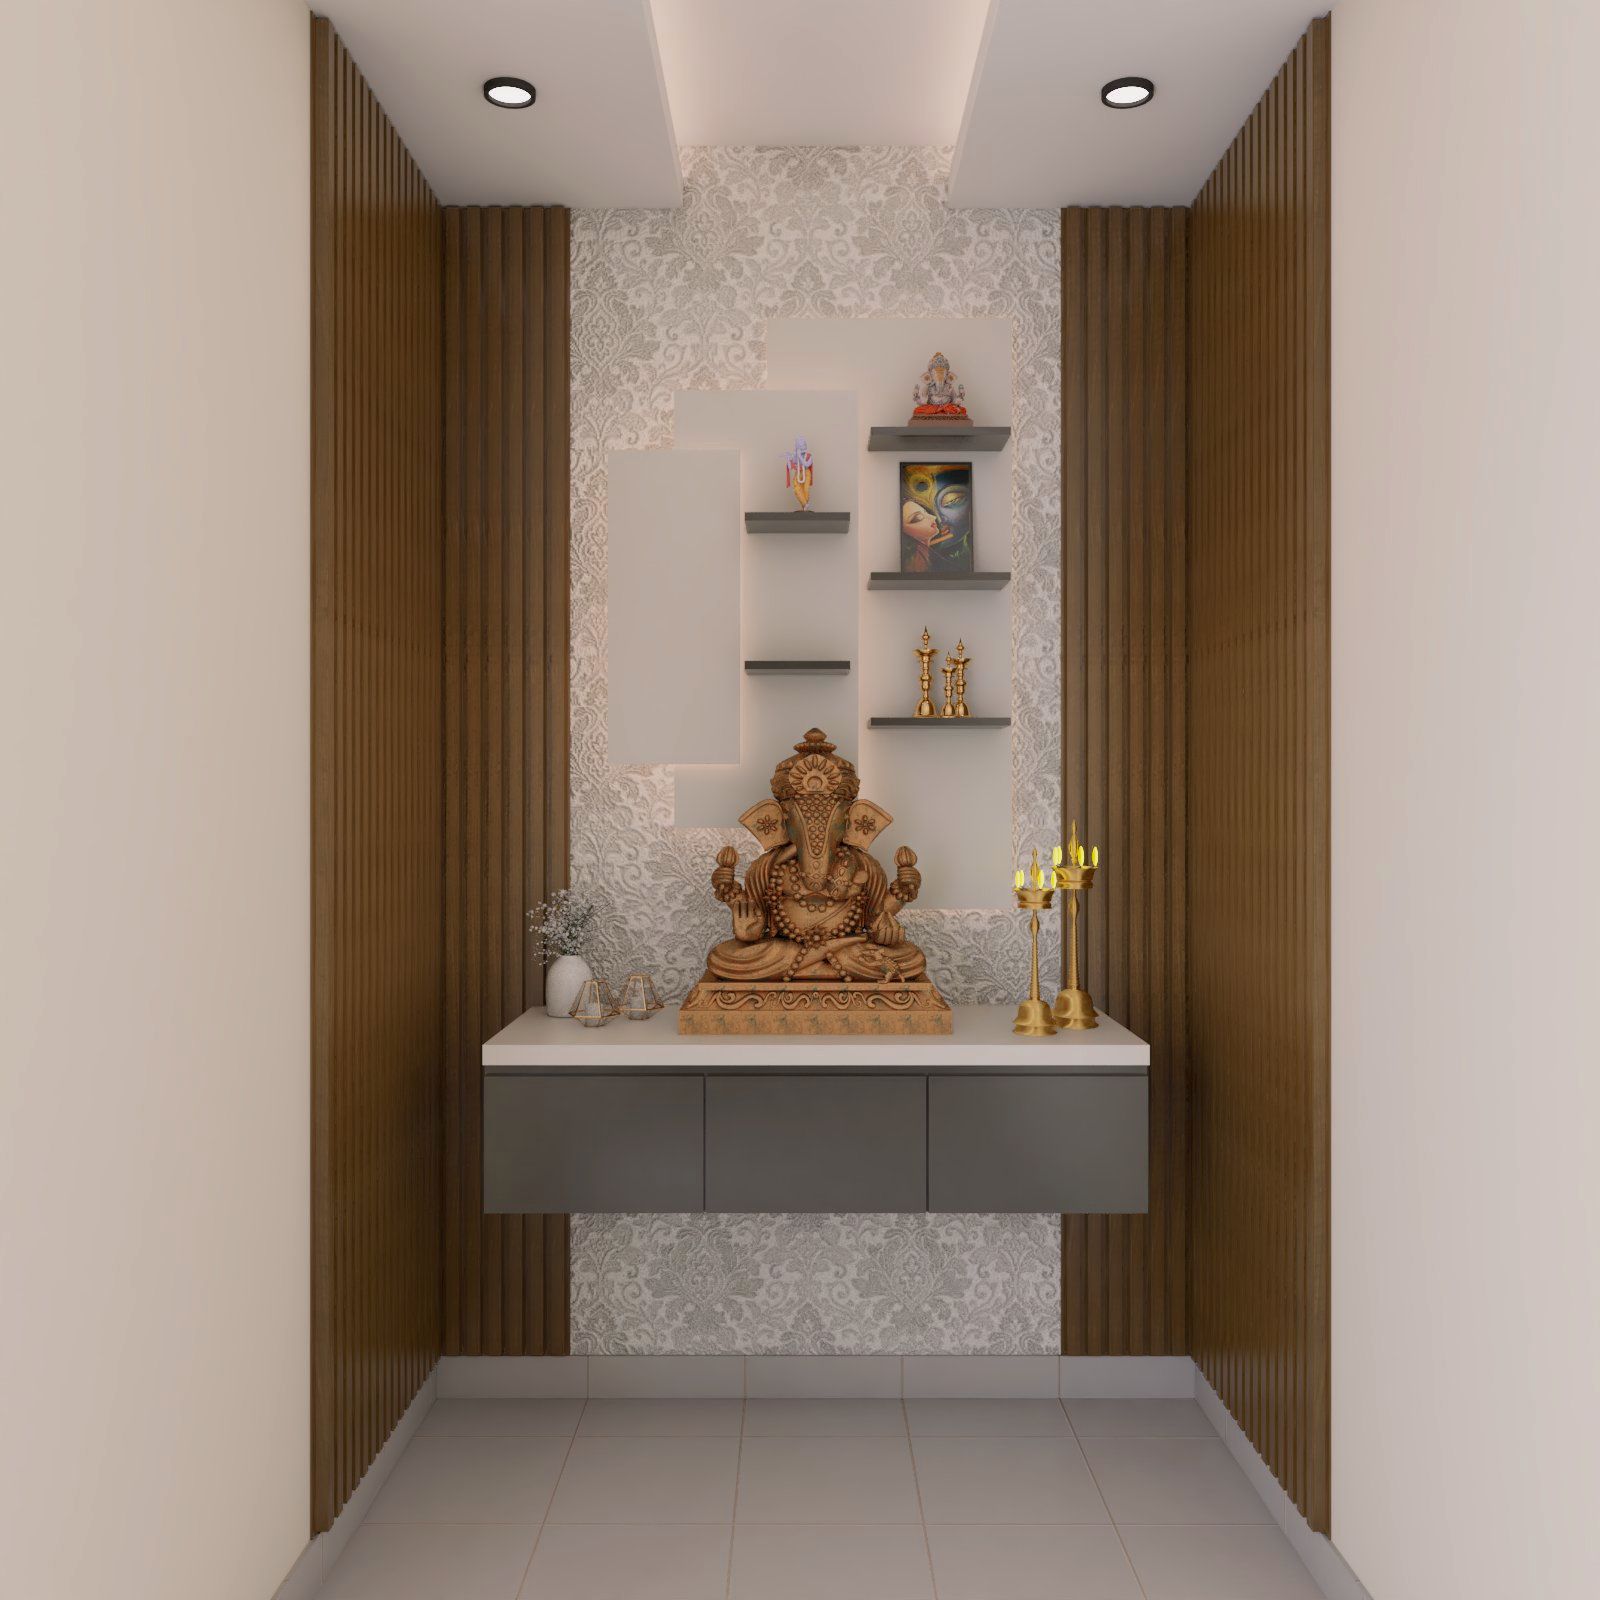 Modern Pooja Room Design With Slate Grey Wall-Mounted Drawer Storage And Wooden Panels